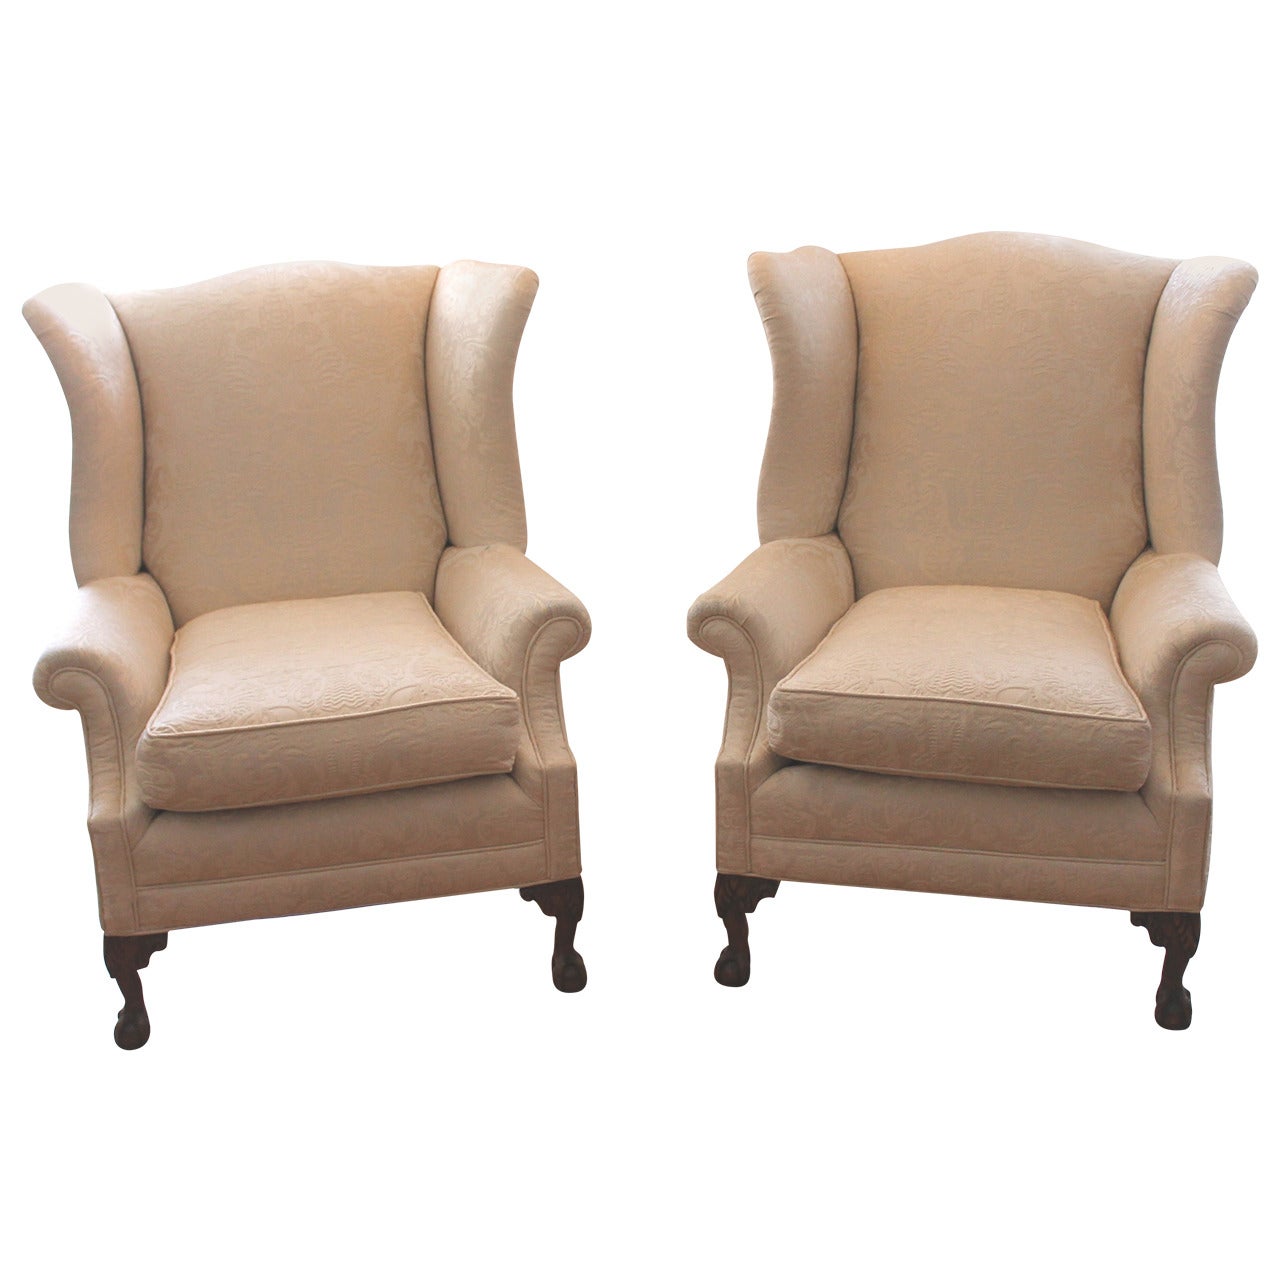 Pair of Monumental Damask Wing Chairs